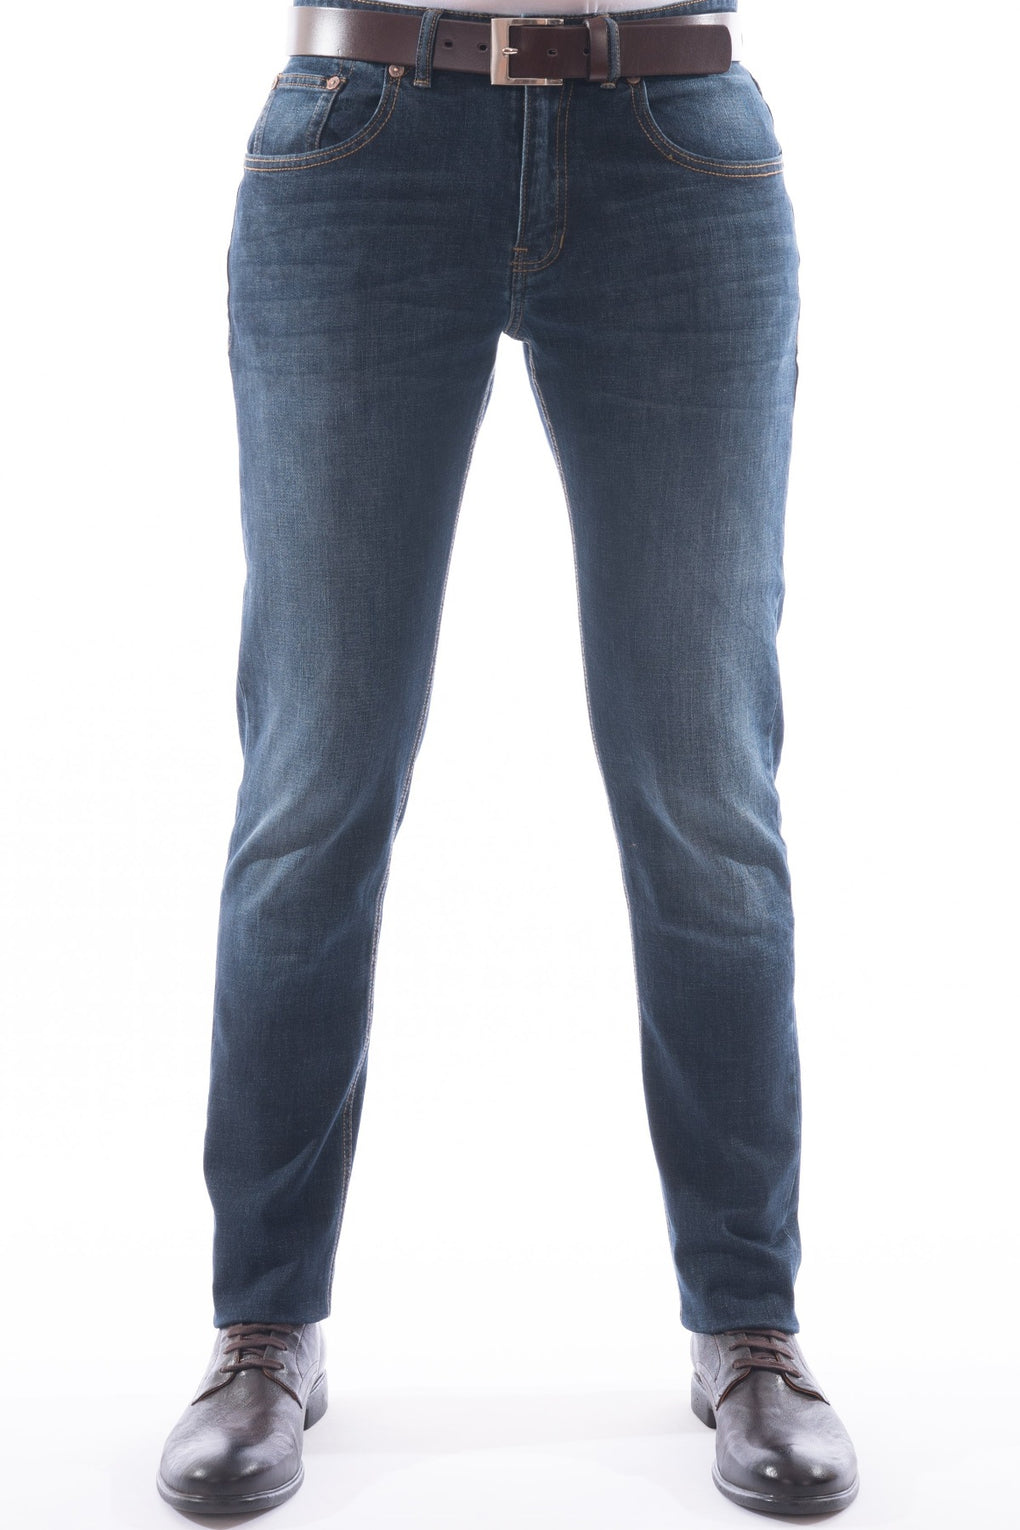 Pearly King - Bypass Dark Wash Jeans – Jay Dillon